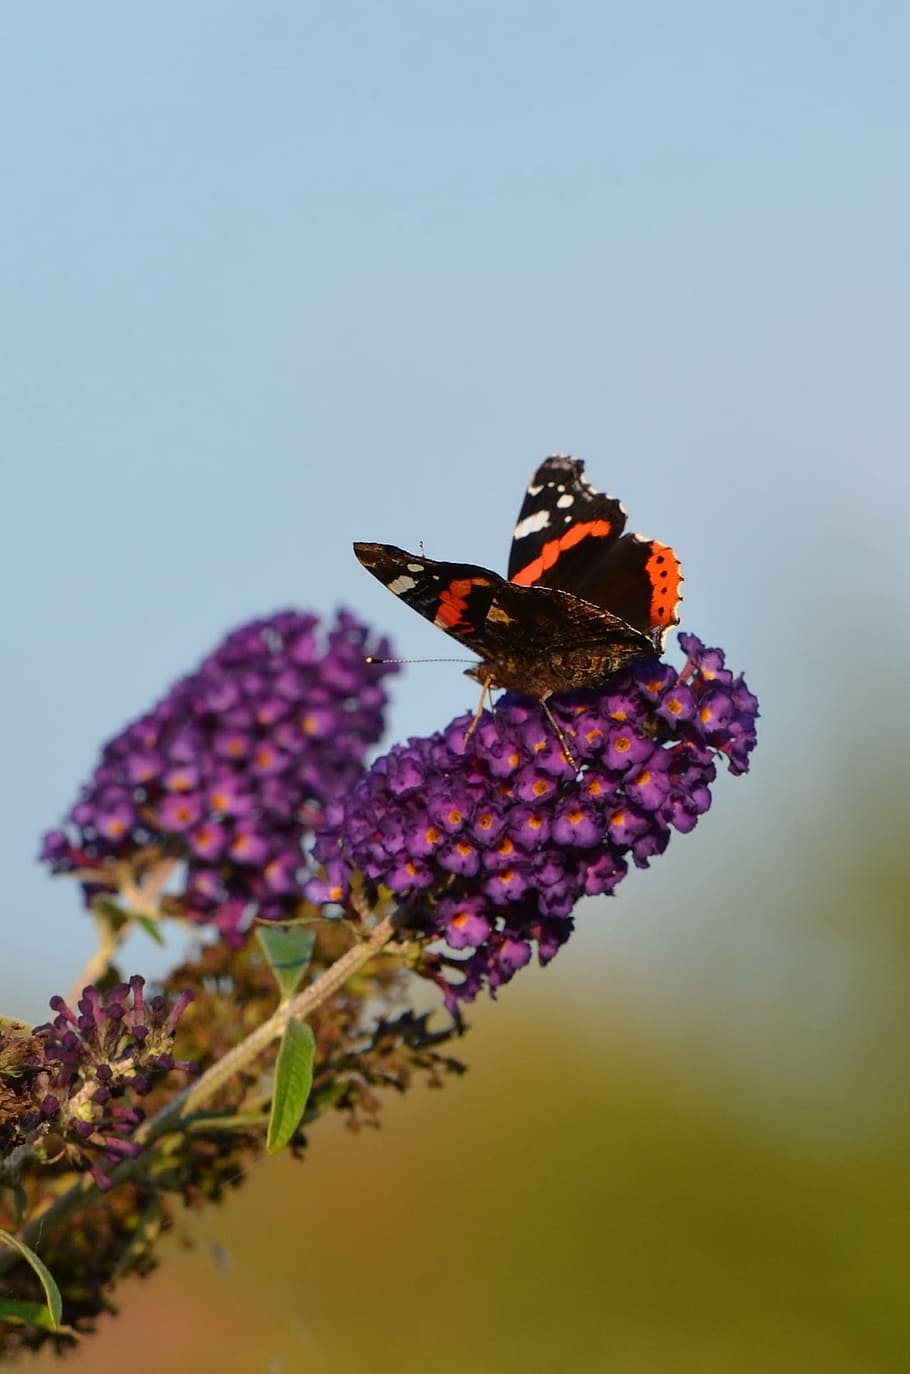 Butterfly, Summer, Lilac, Nature, Insect, summer lilac, purple, buddleja, butterfly bush, butterfly - insect